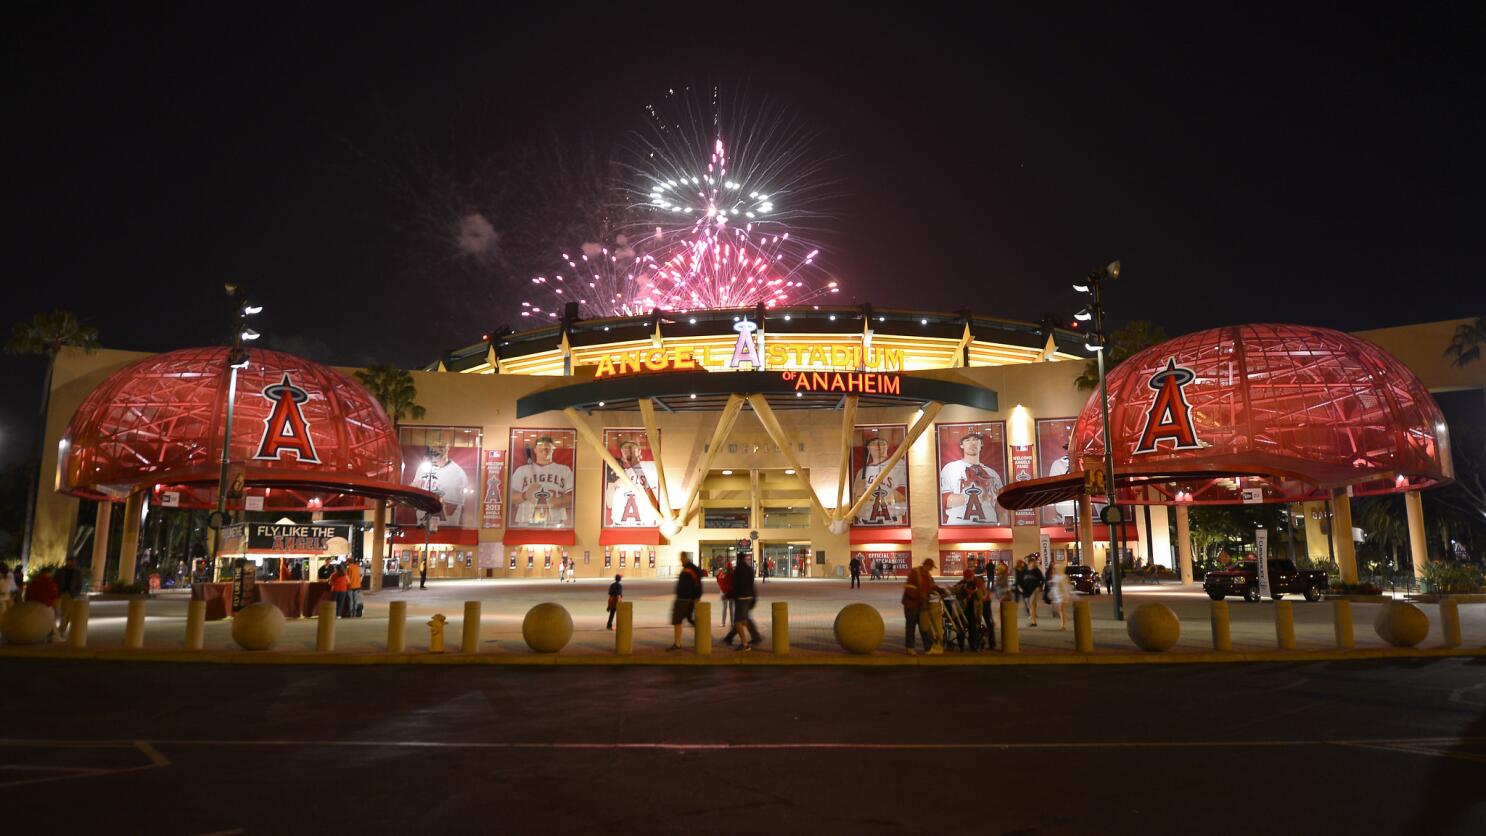 The Angels are opting out of their stadium lease and could leave Anaheim